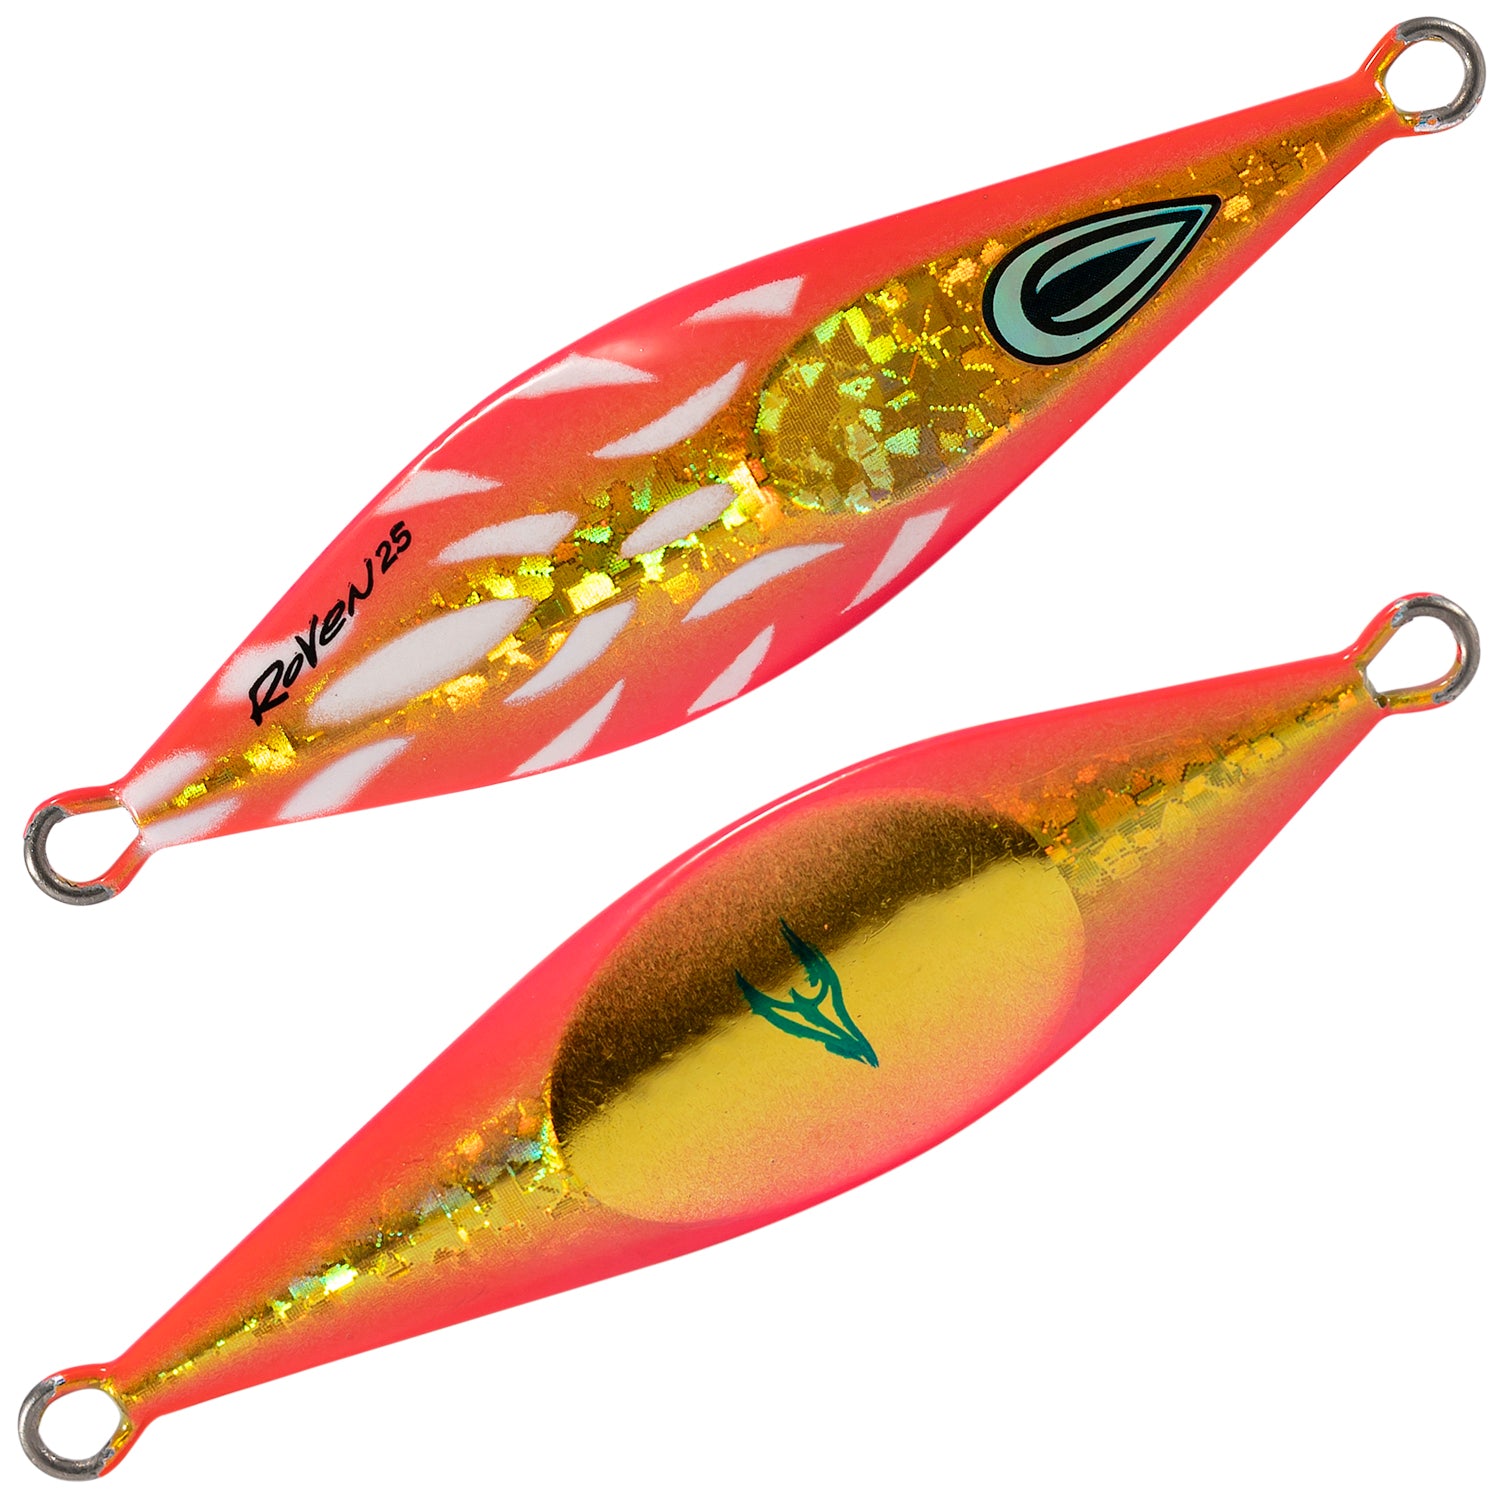 Oceans Legacy Roven Jig Rigged 10g 3